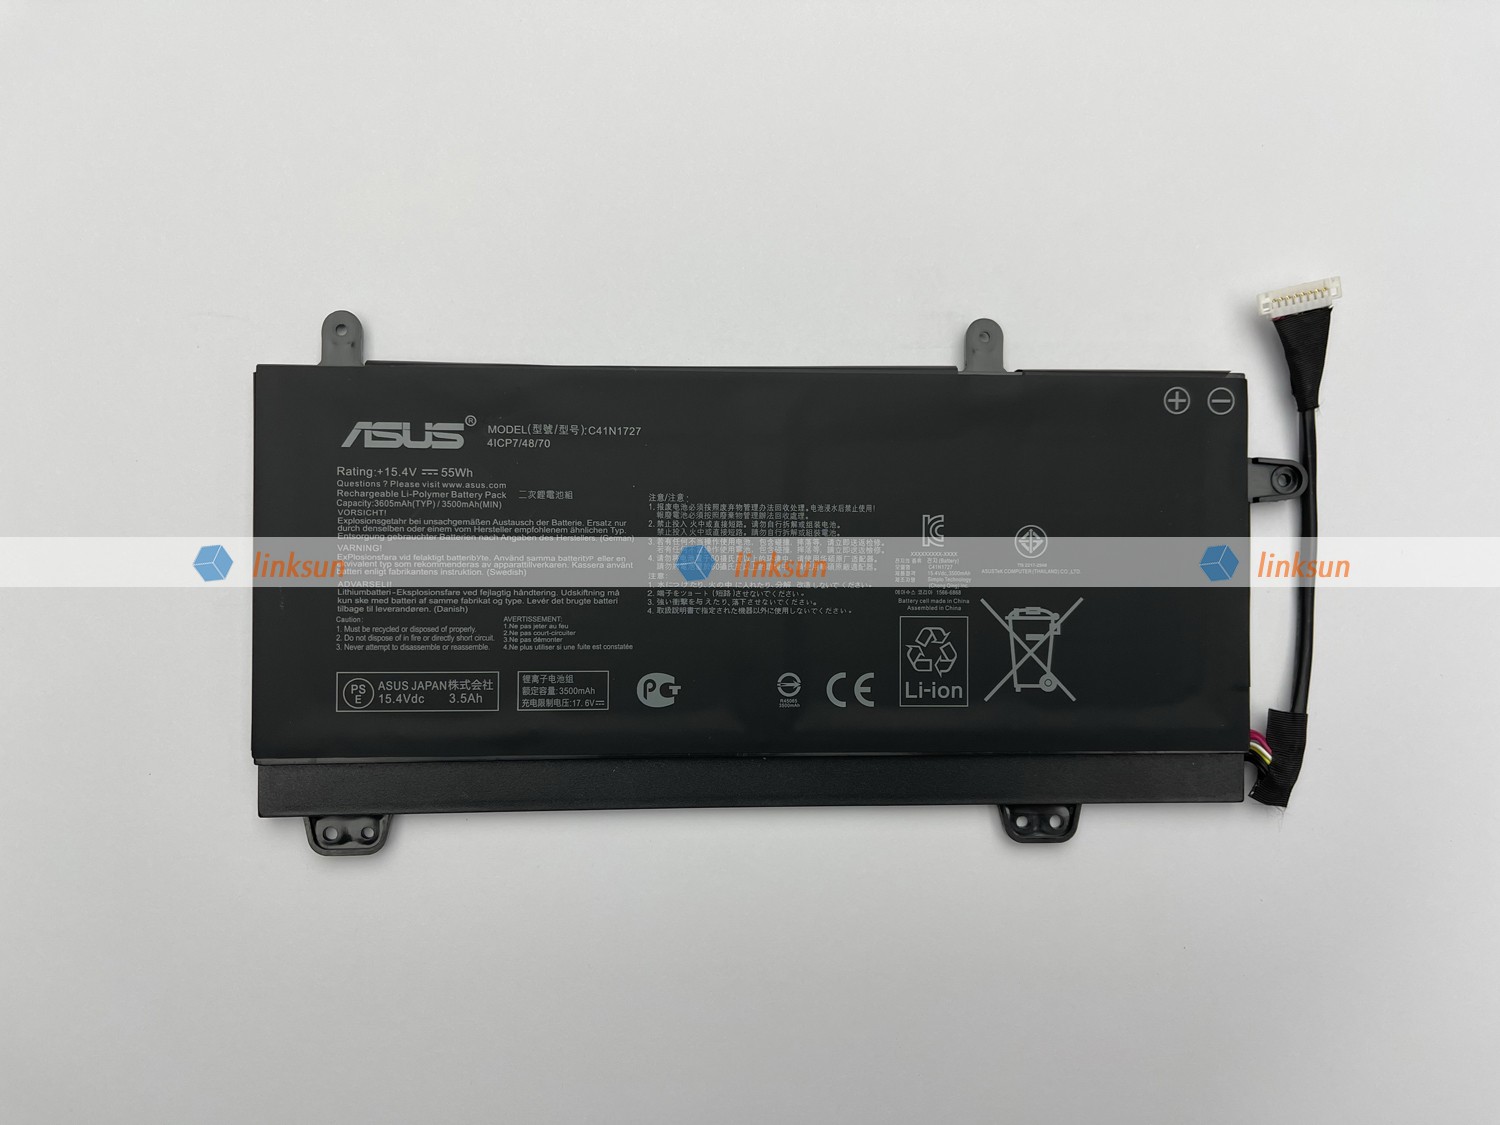 C41N1727 battery front